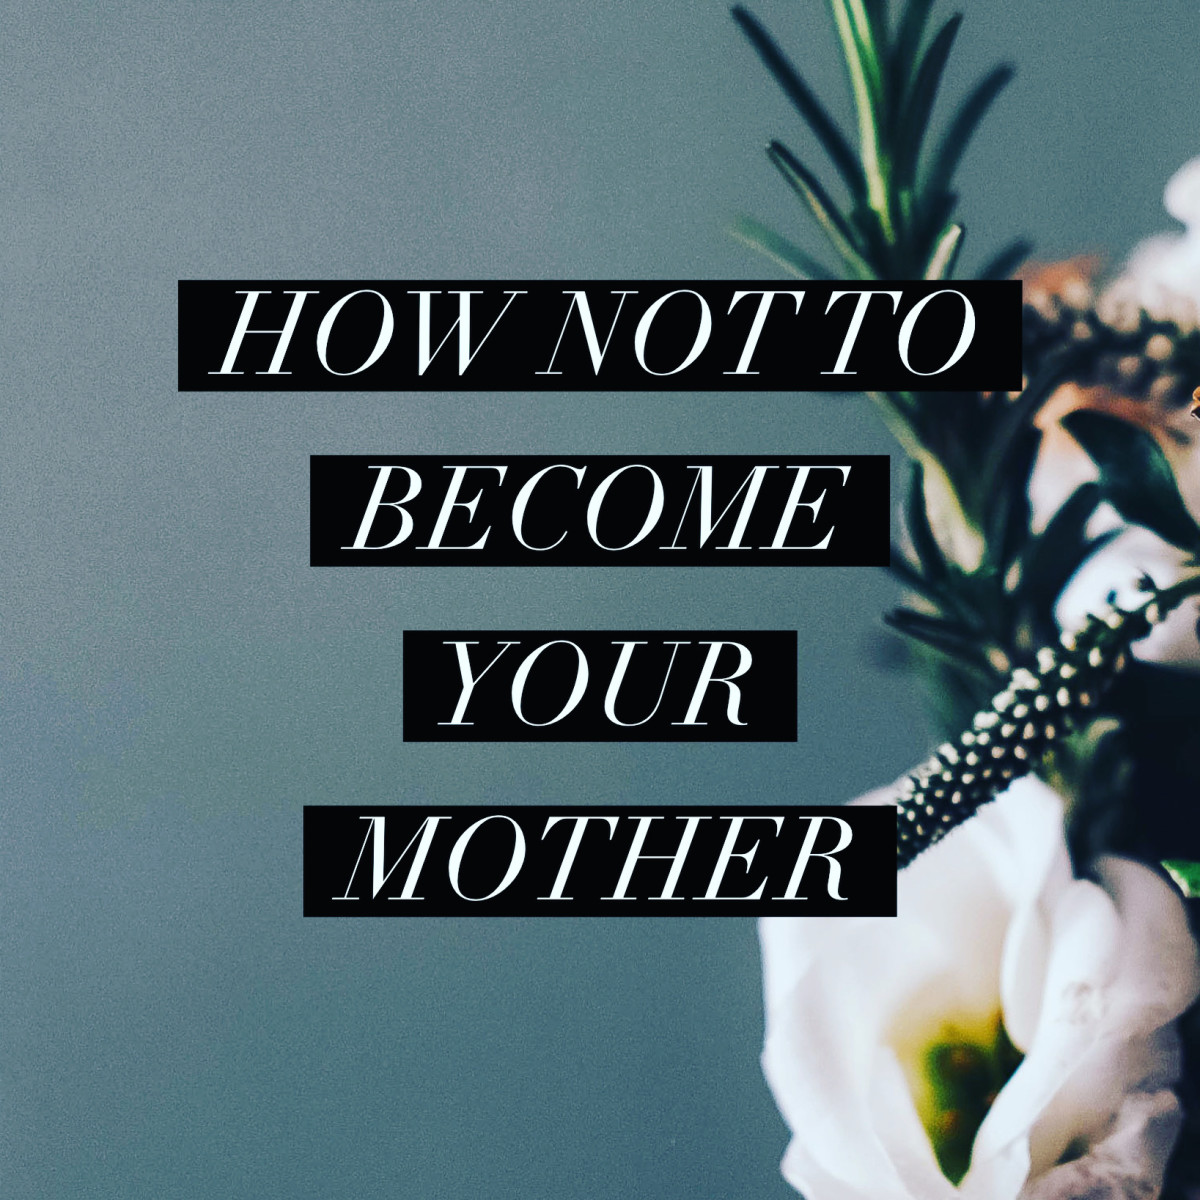 How NOT to Become Your Mother